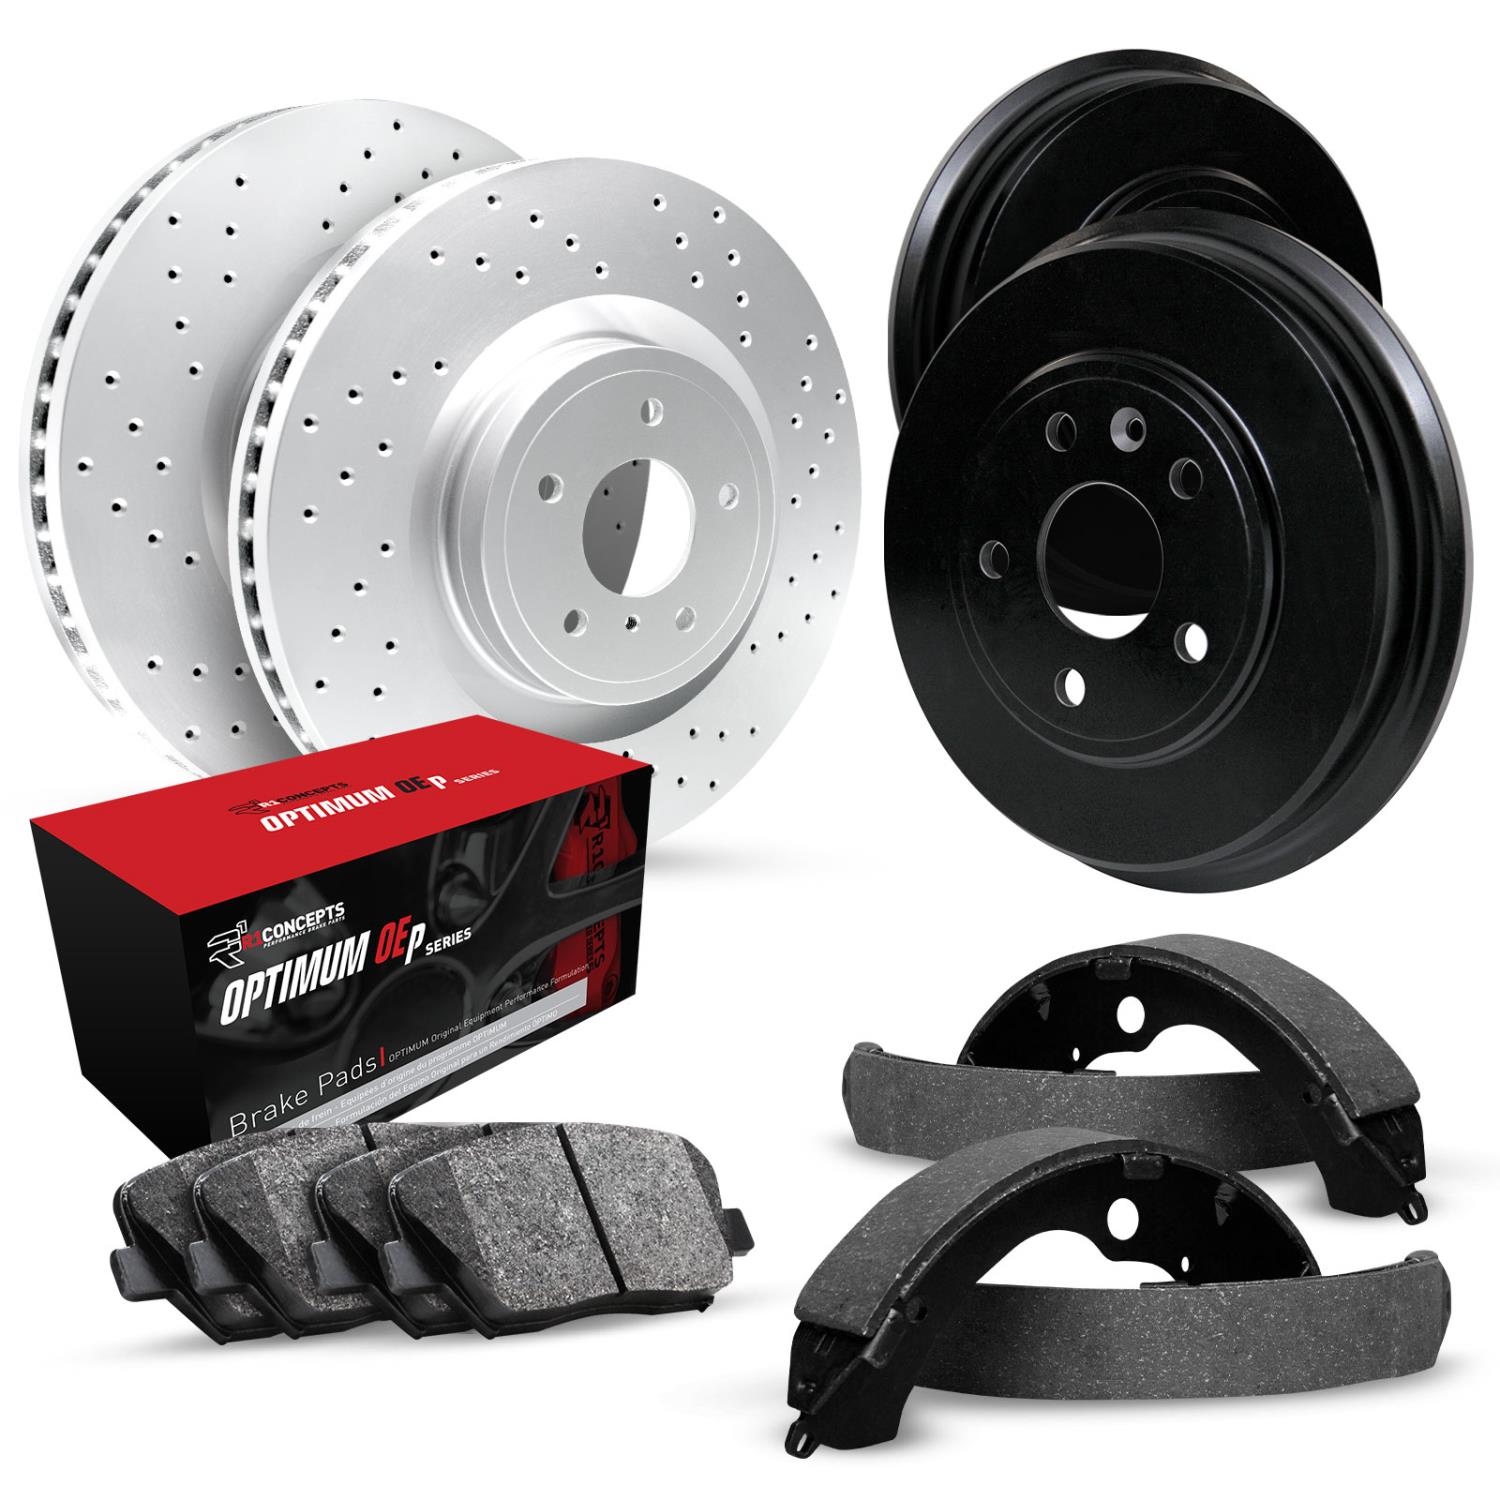 GEO-Carbon Drilled Brake Rotor & Drum Set w/Optimum OE Pads & Shoes, 2002-2005 Land Rover, Position: Front & Rear